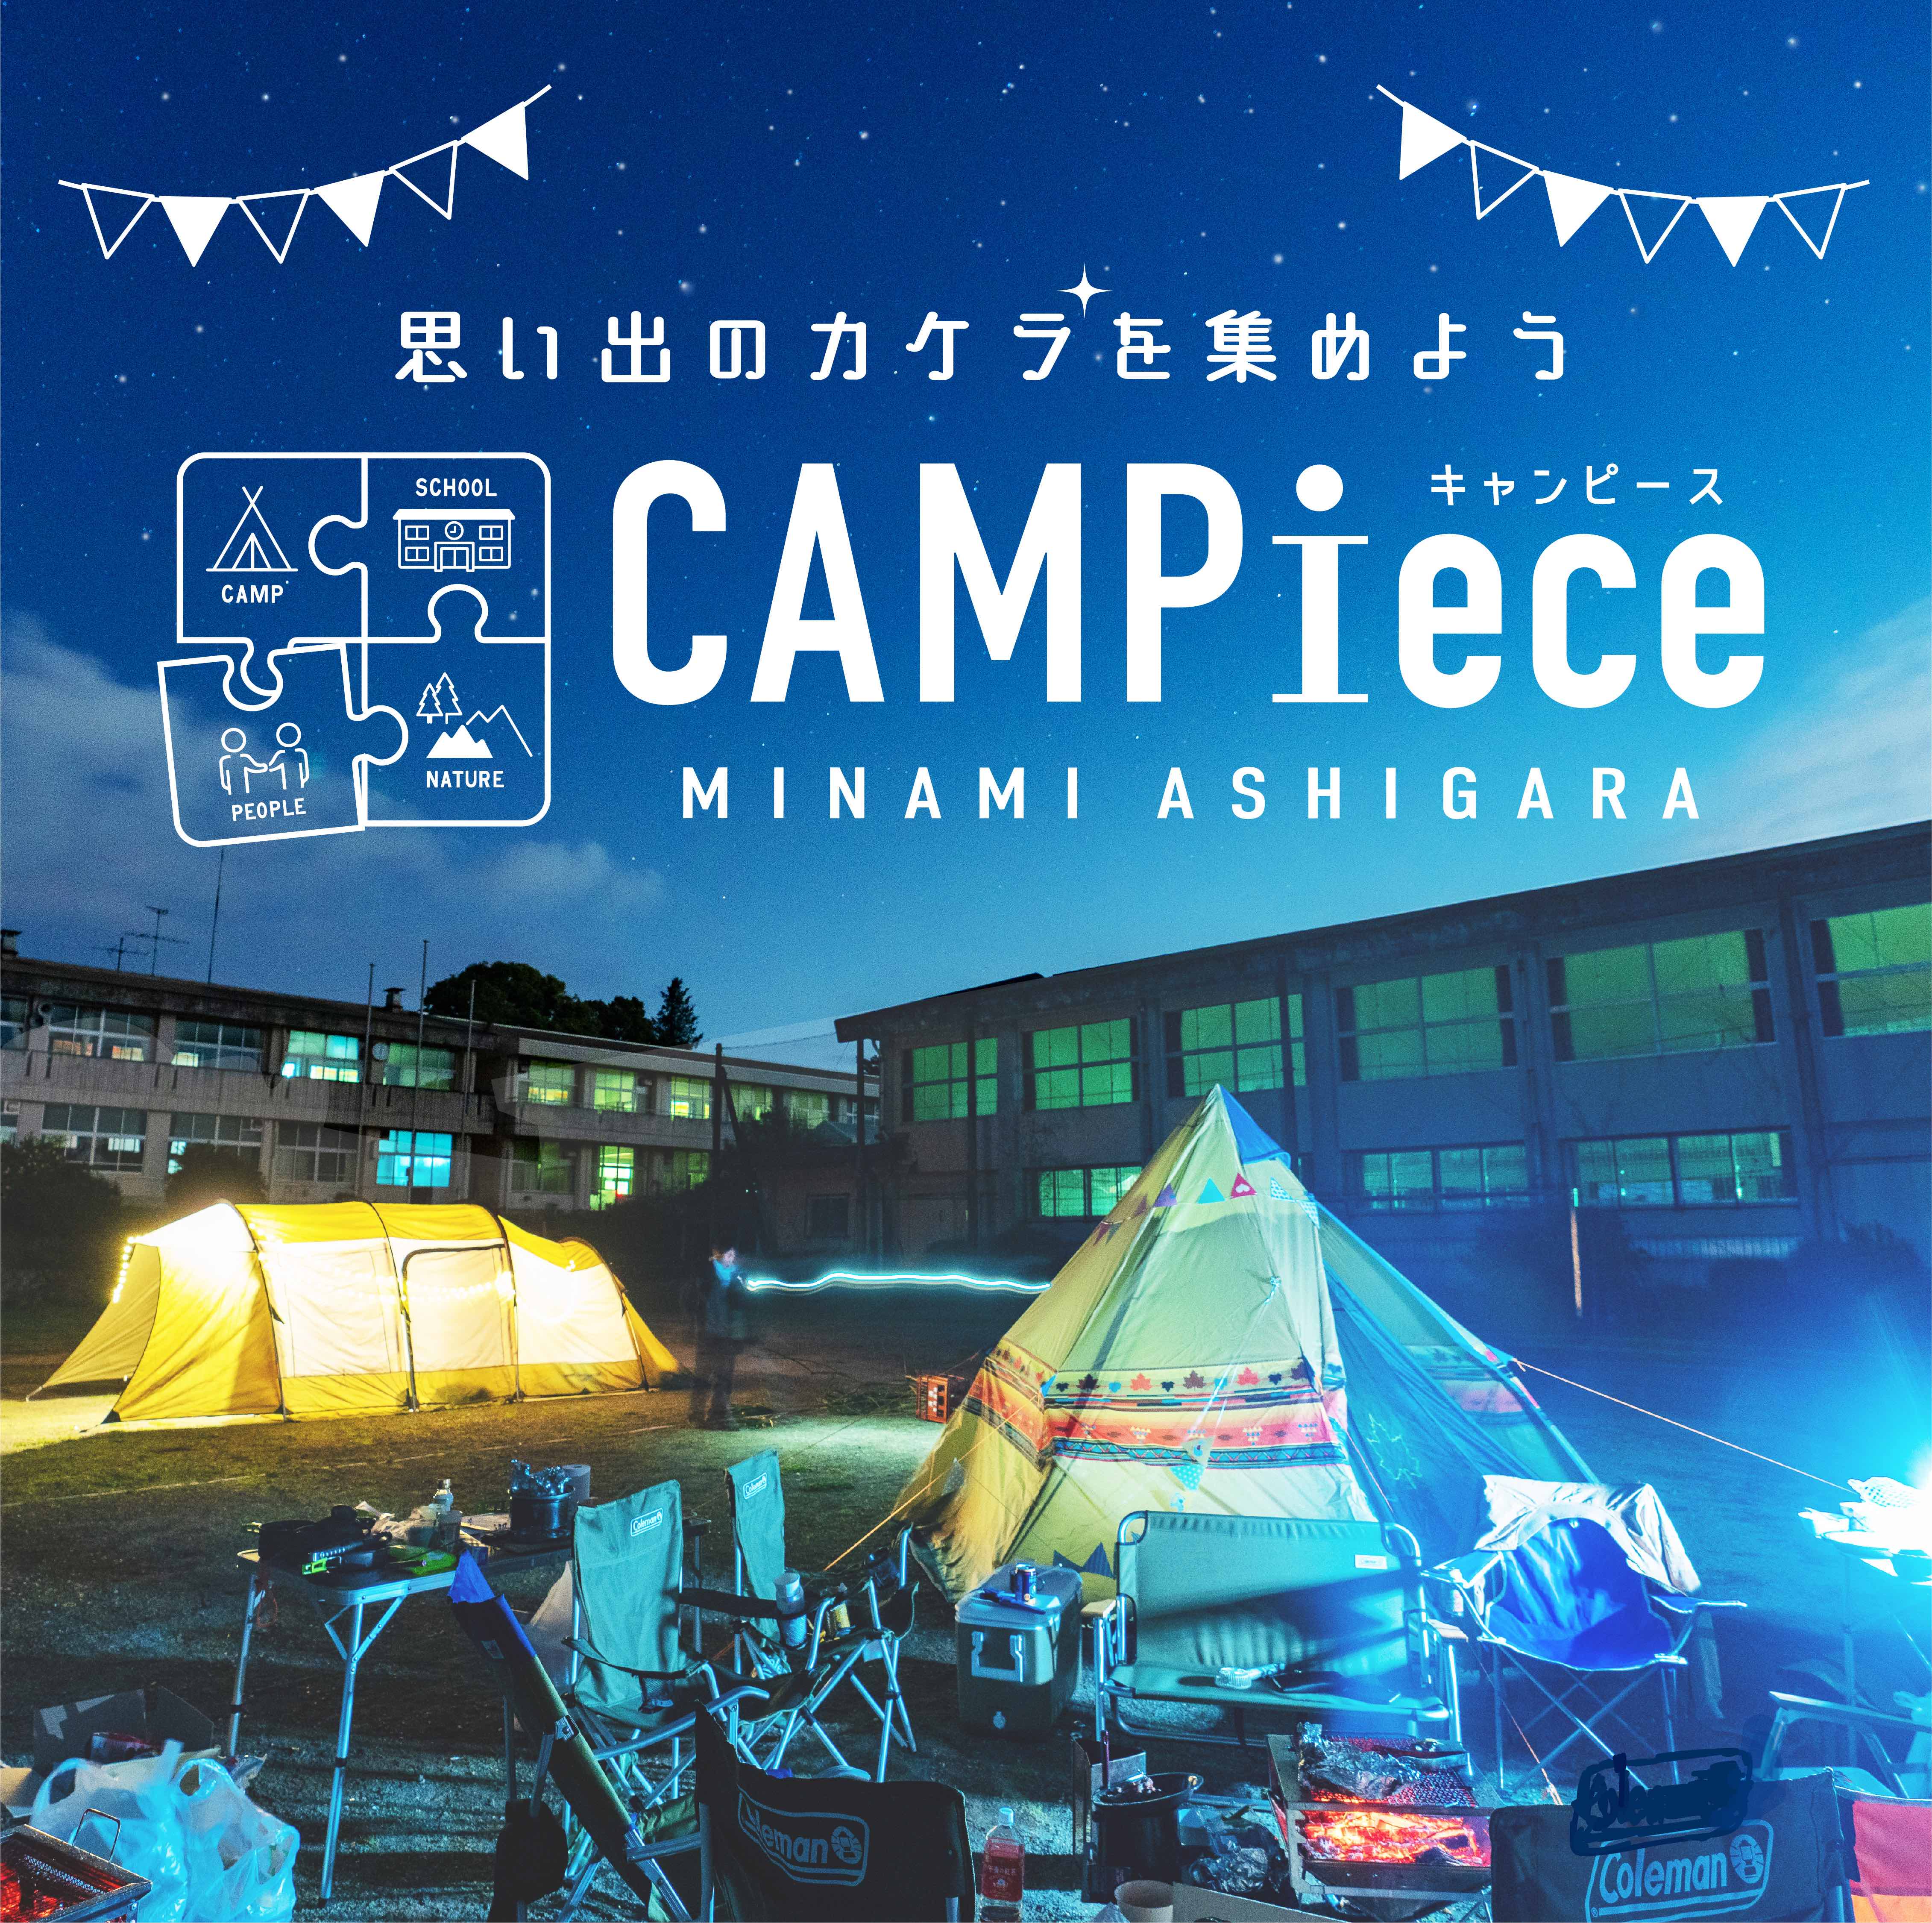 out_スマホ版CANPiece_Top